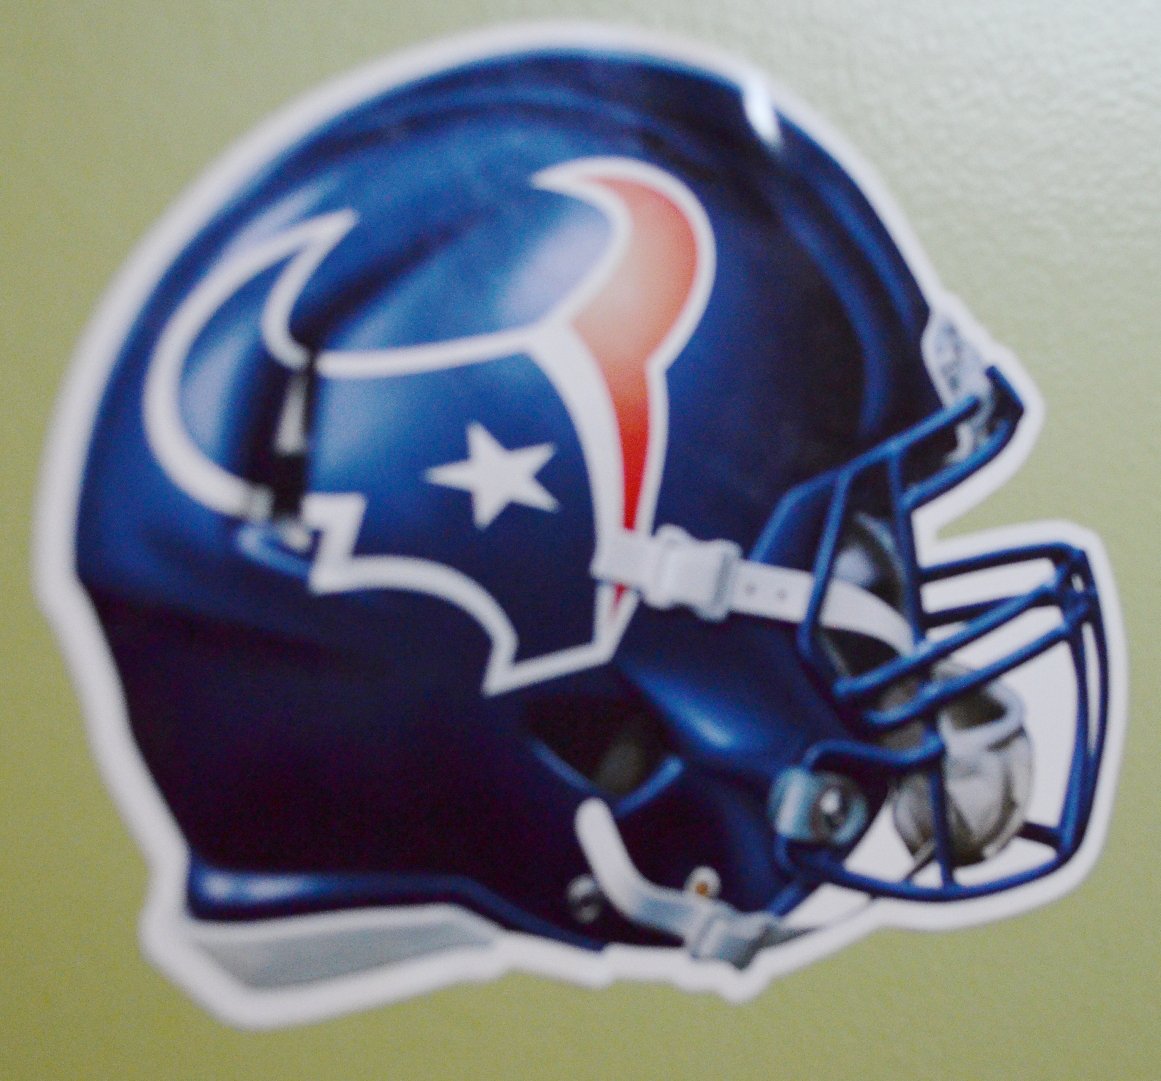 WinCraft Official National Football League Fan Shop Licensed NFL Shop Multi-use Decals (Houston Texans)